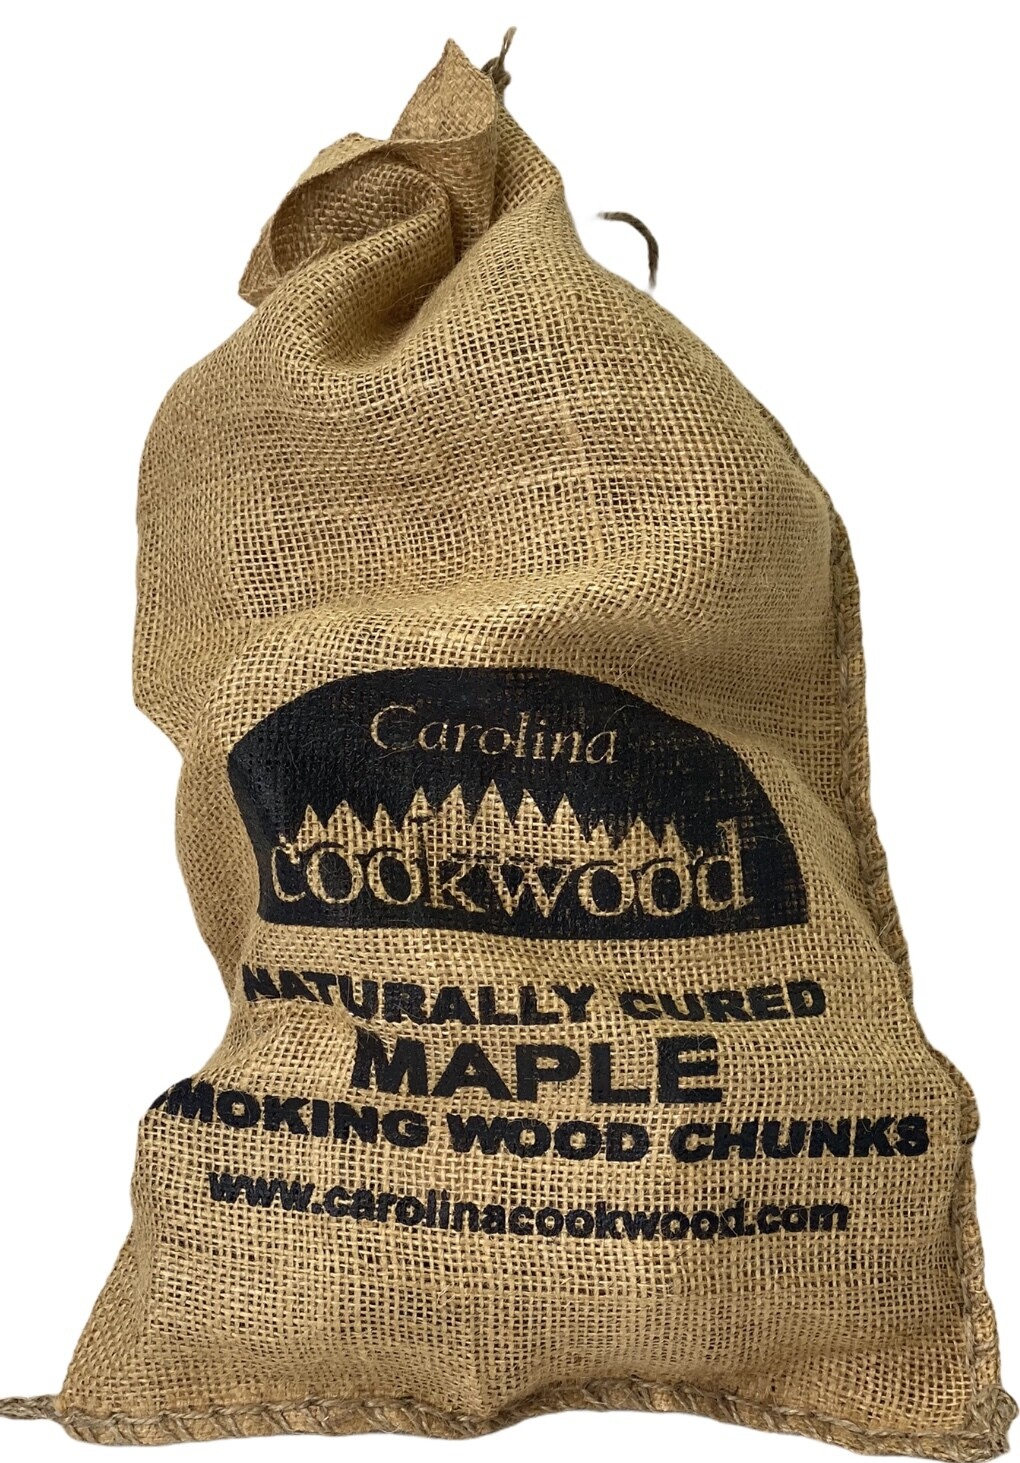 Carolina Cookwood Maple Wood Smoking Chunks for BBQ Meat Brisket Ribs Chicken Turkey and More